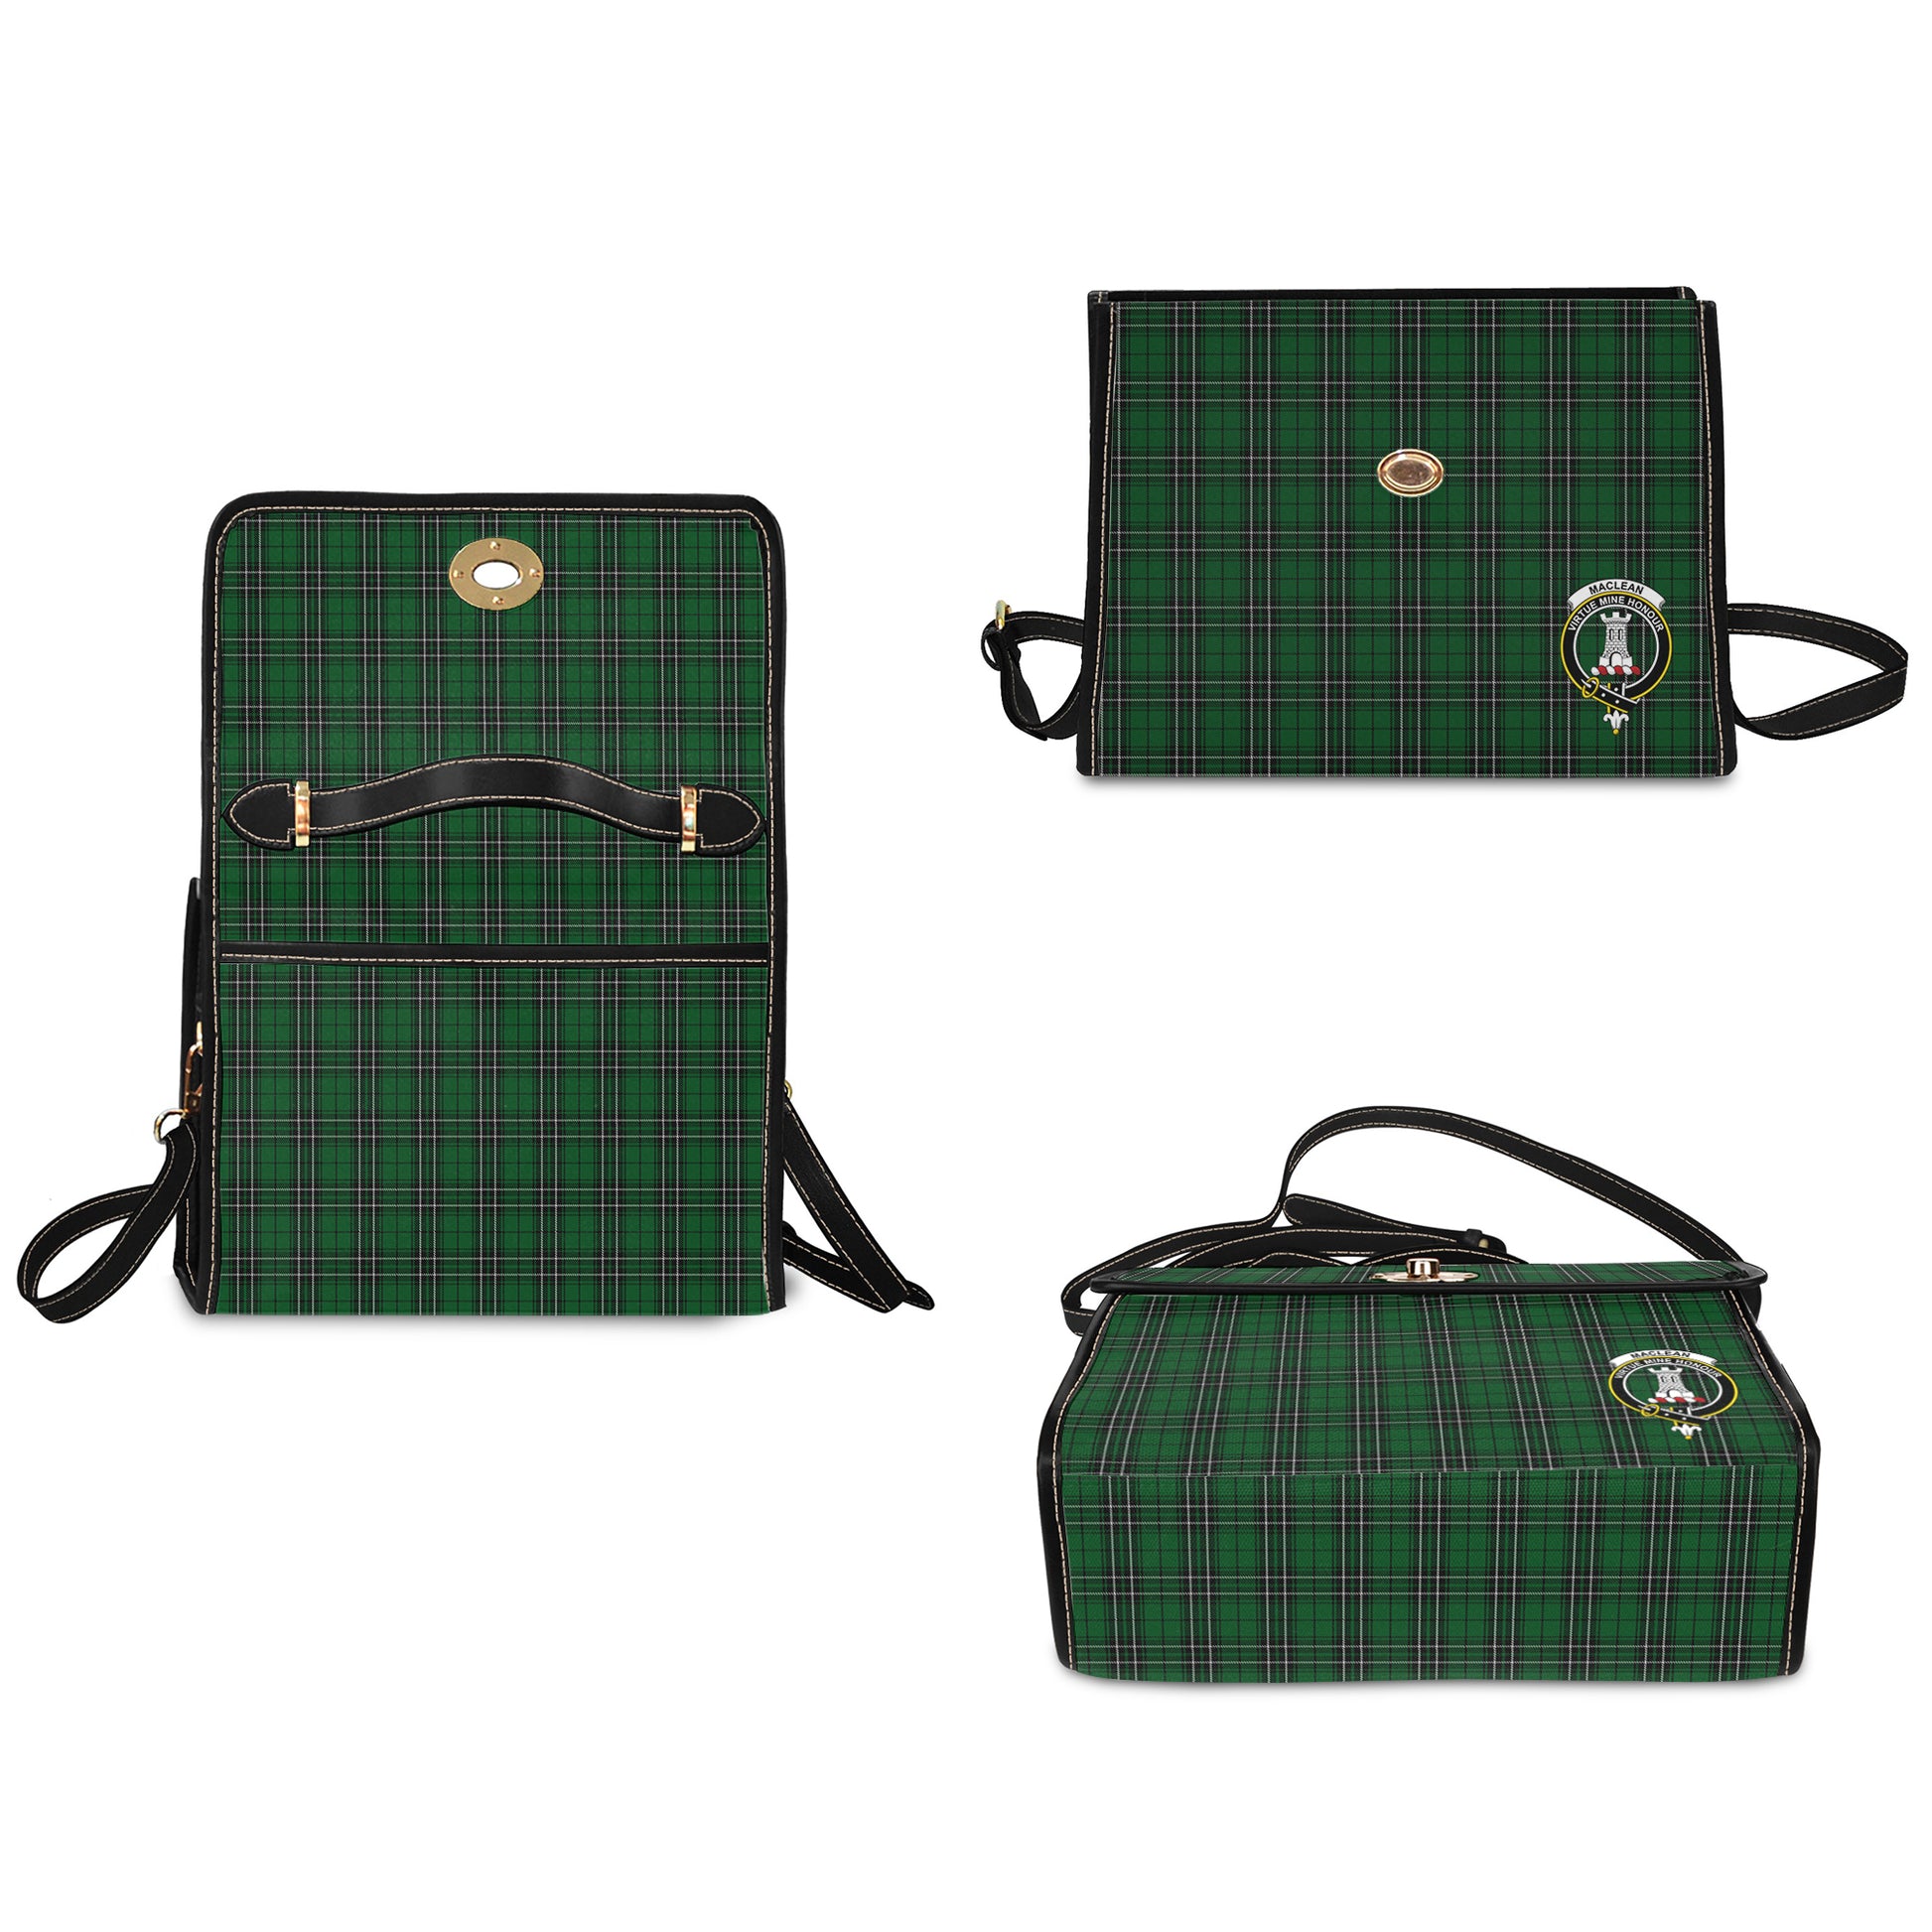 maclean-of-duart-hunting-tartan-leather-strap-waterproof-canvas-bag-with-family-crest